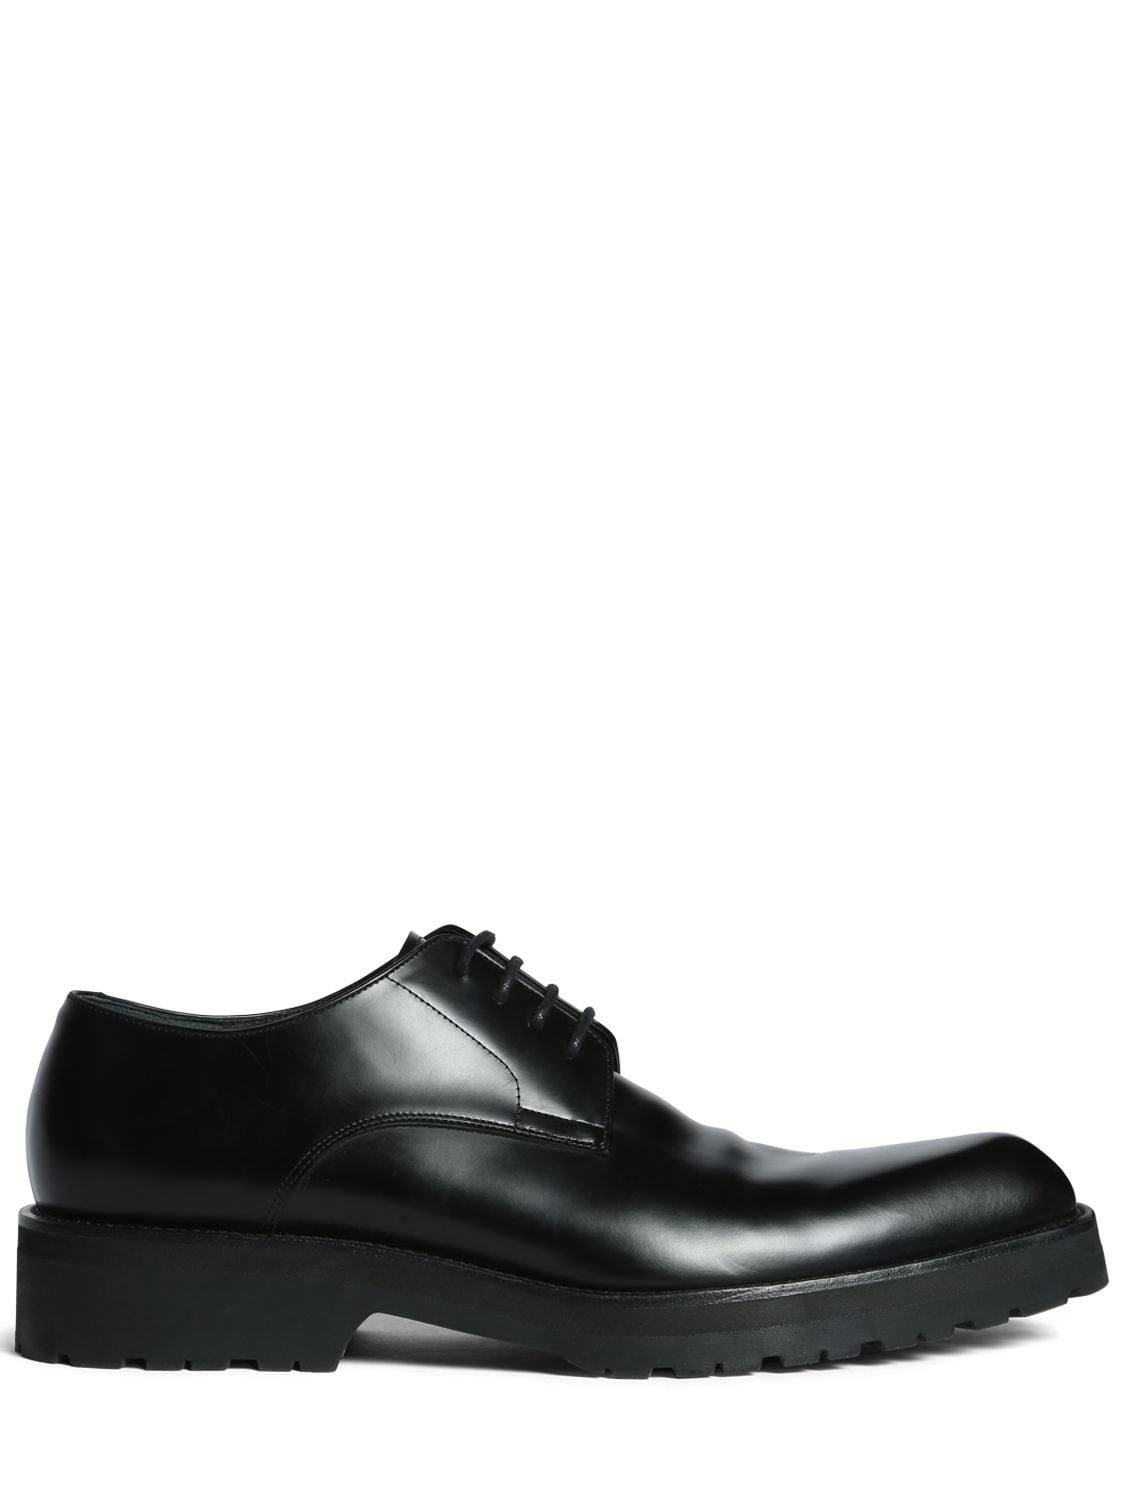 Dries Van Noten - Leather lace-up derby shoes - Black | Luisaviaroma